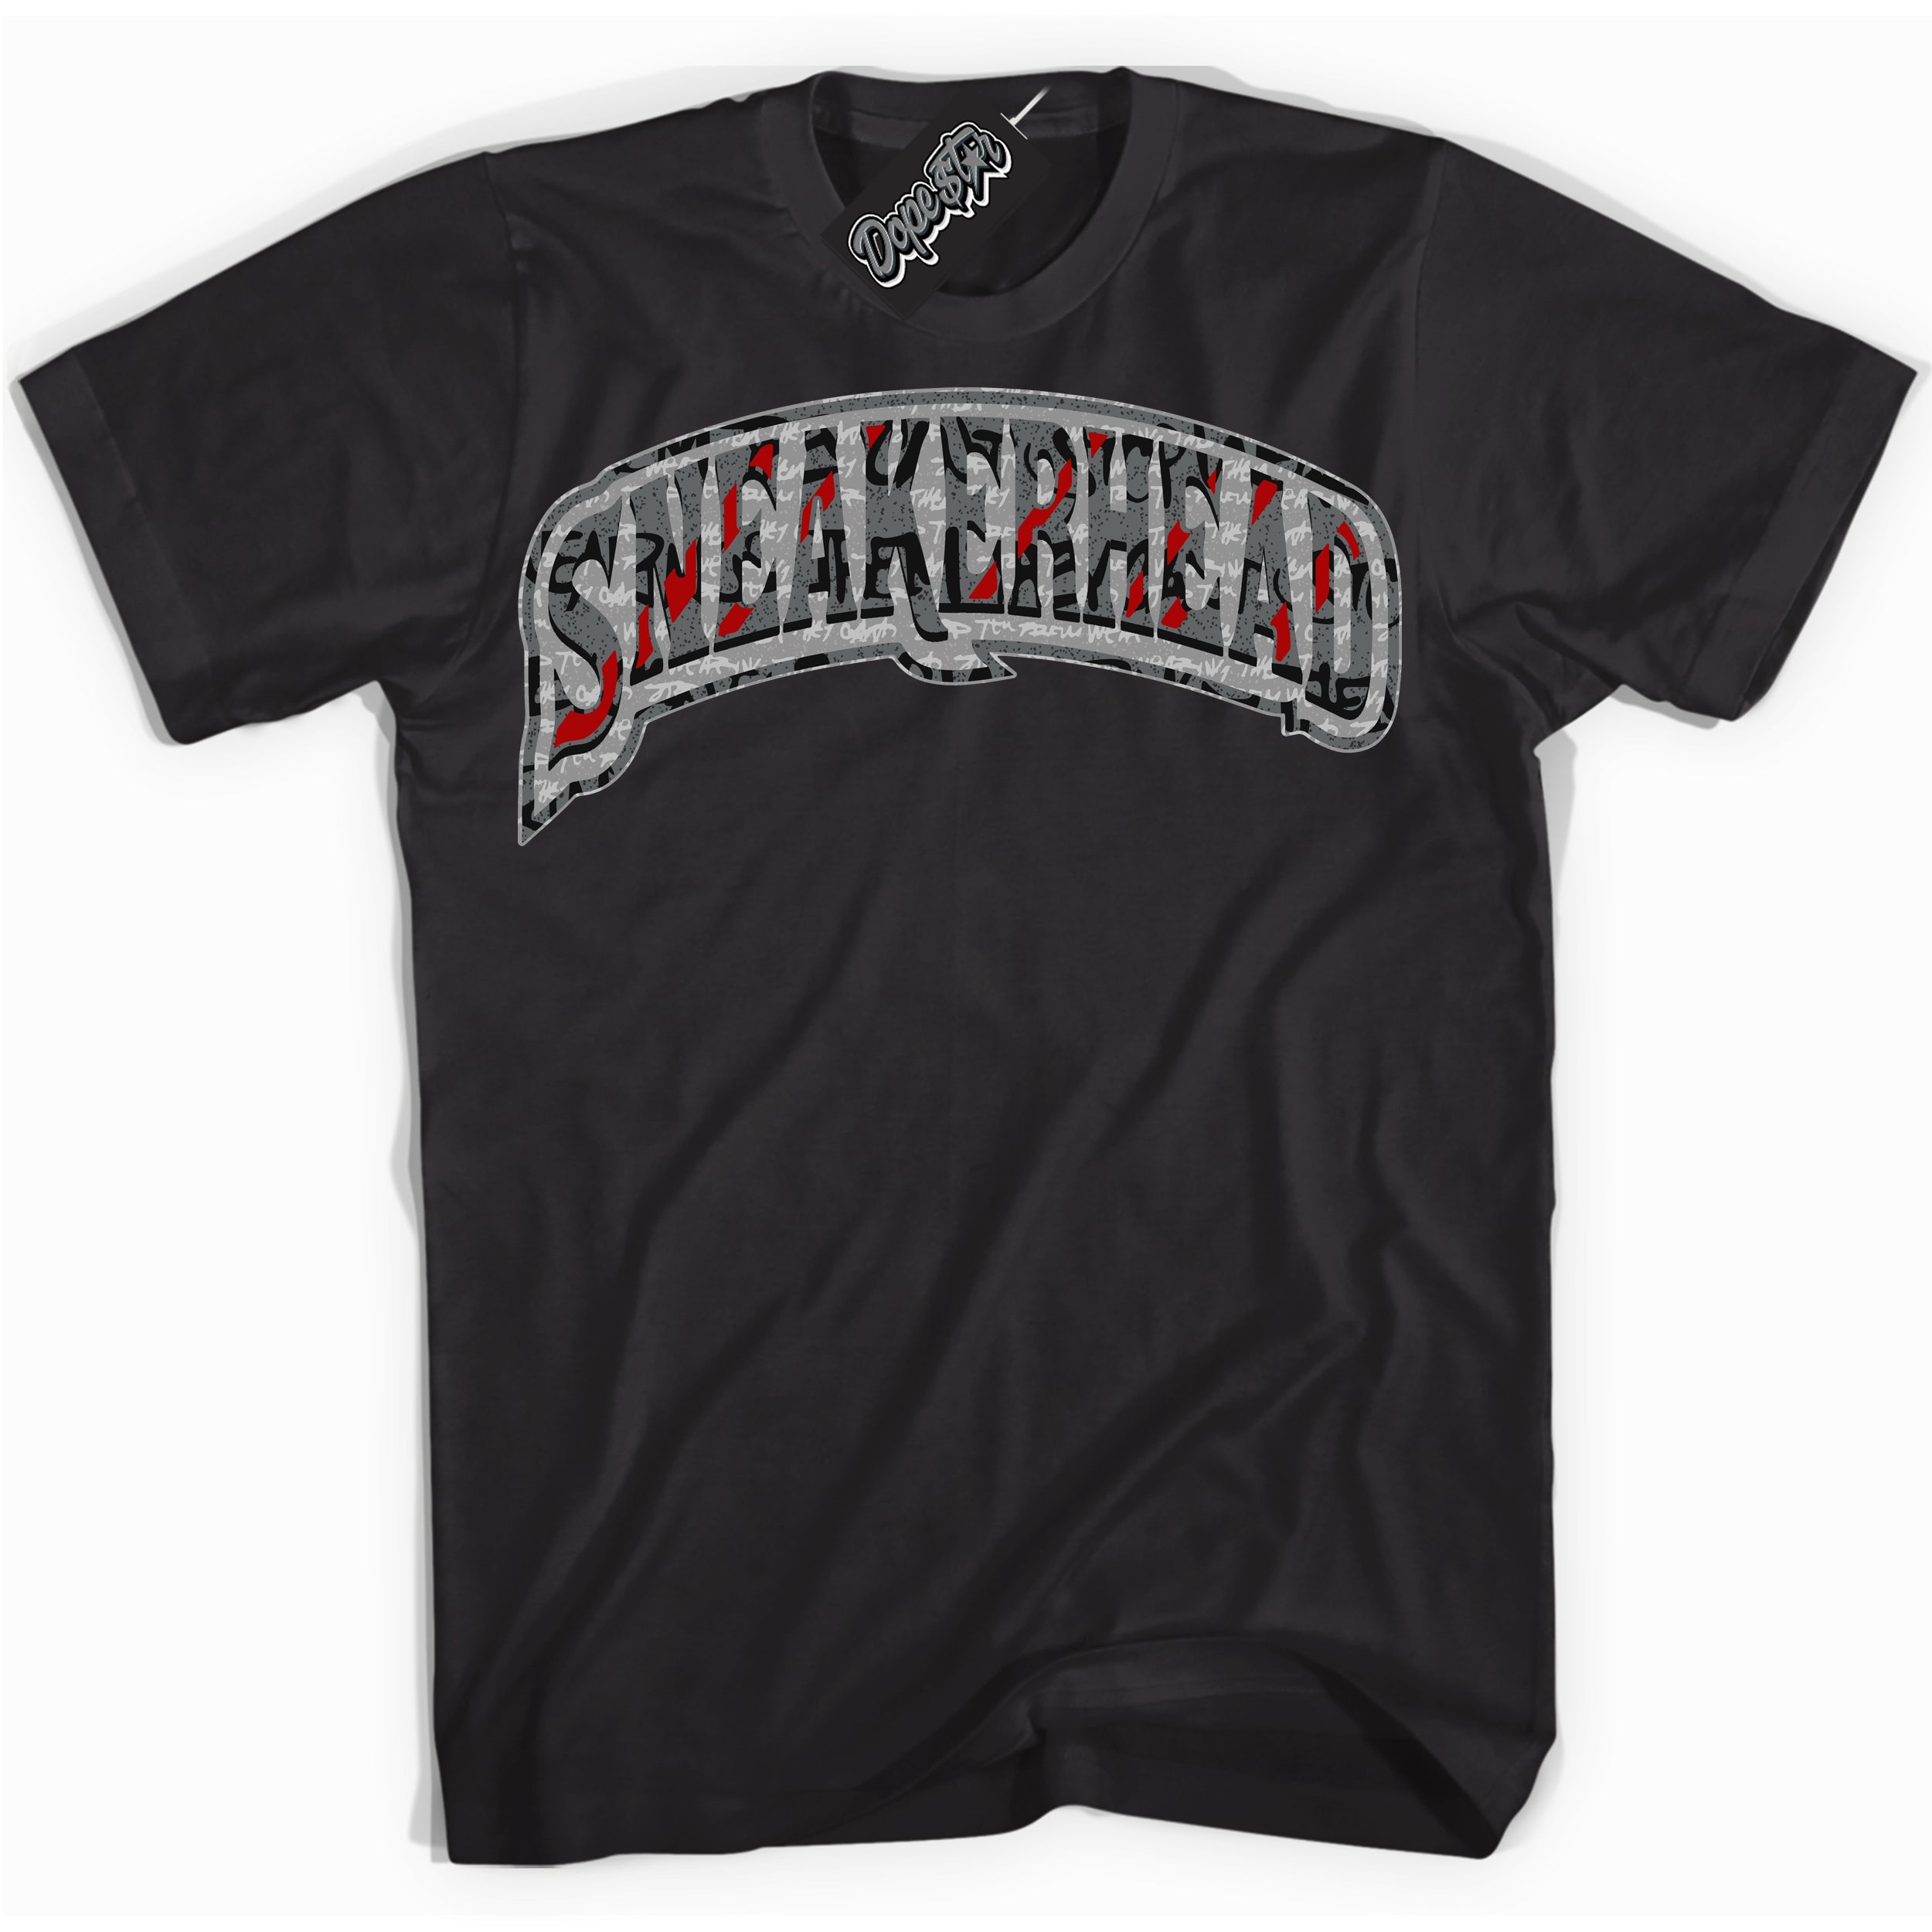 Cool Black Shirt with “ Sneakerhead ” design that perfectly matches Rebellionaire 1s Sneakers.